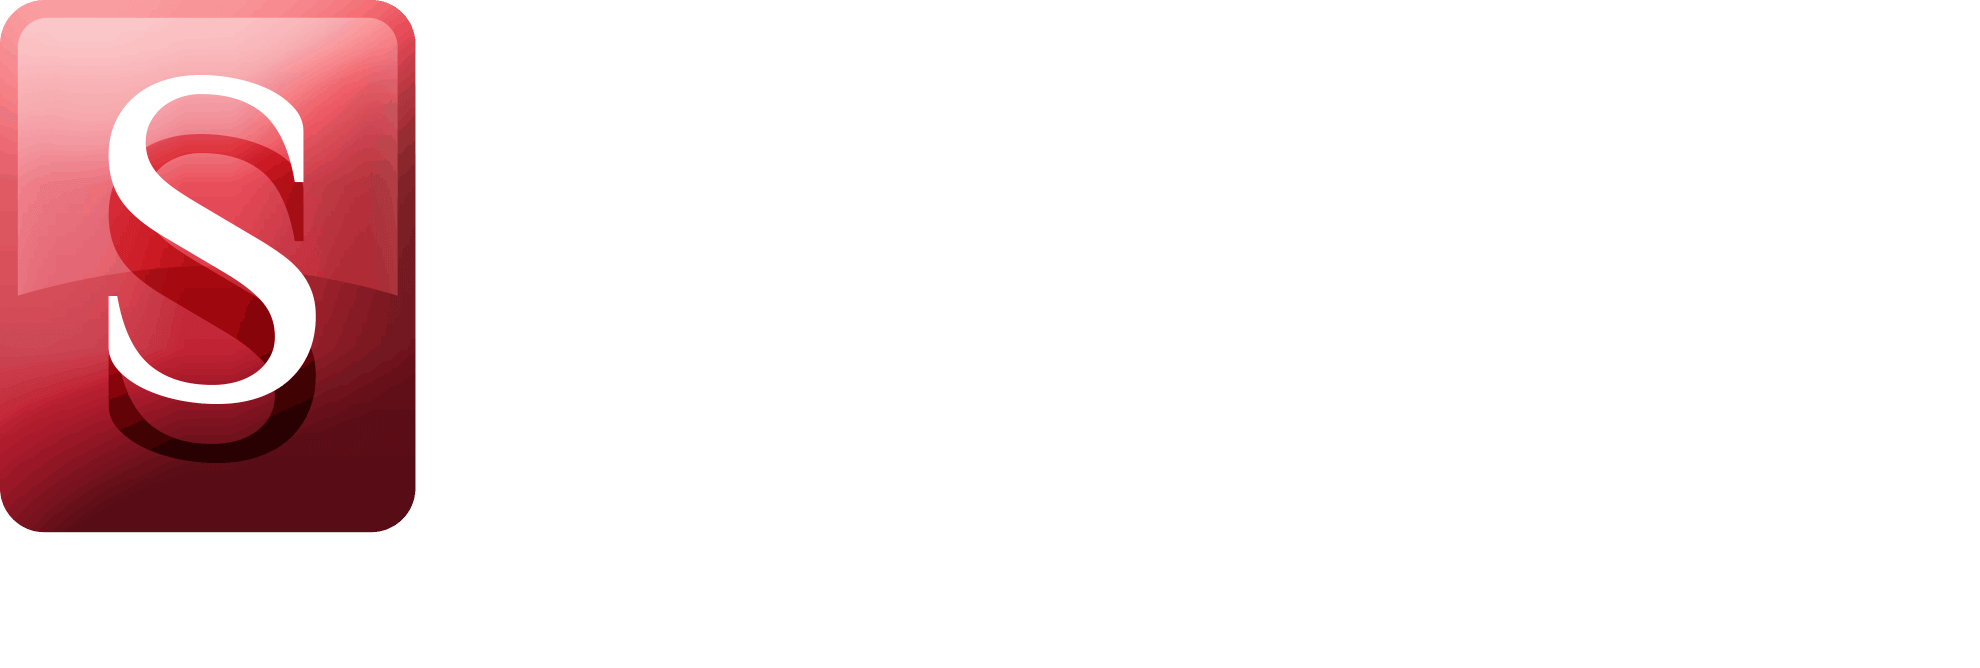 Logo for the Shook & Stone case study, representing the partnership and collaboration between Avalaunch Media and Shook & Stone law firm.